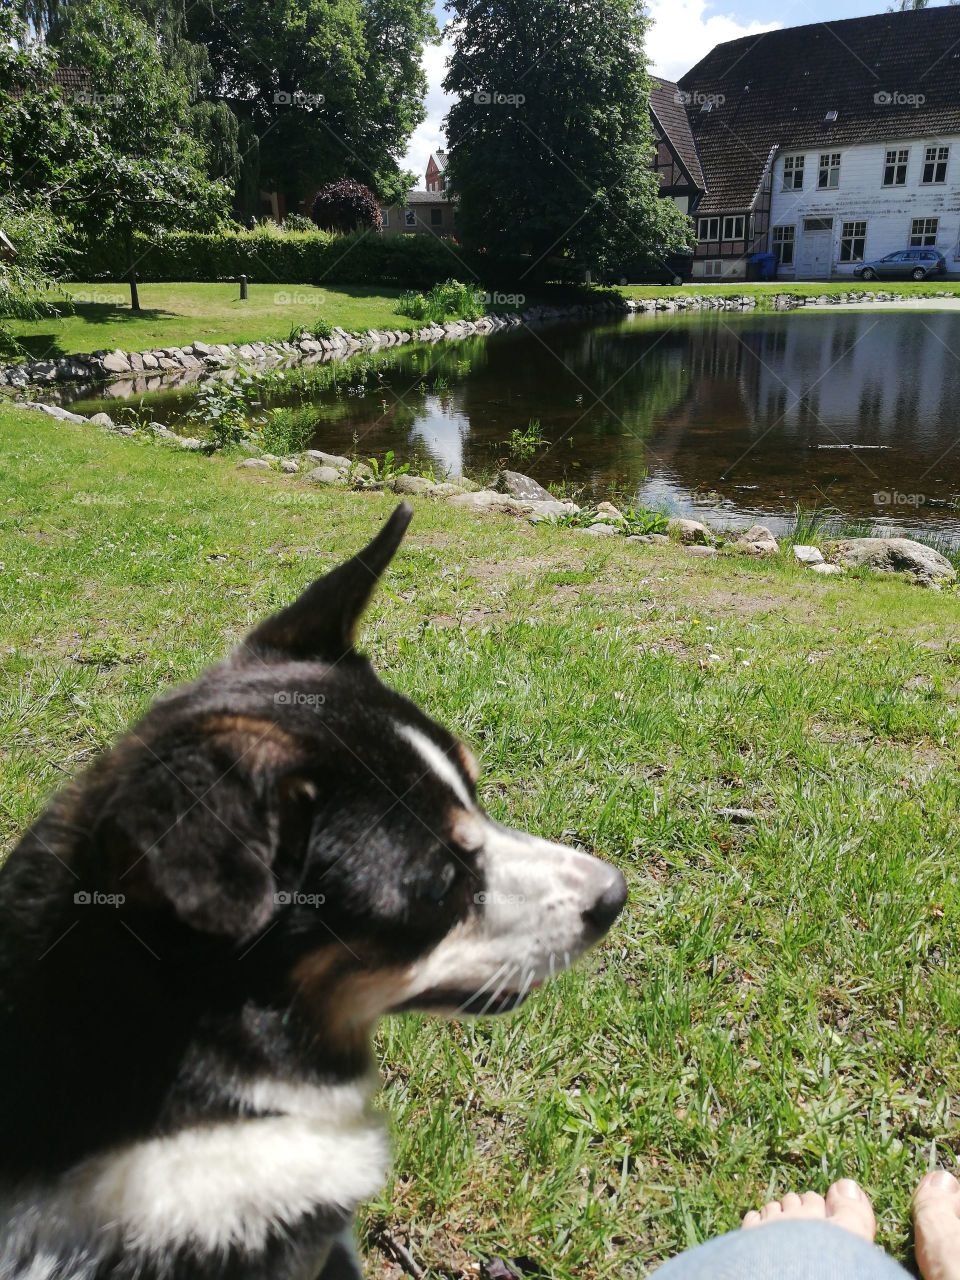 Dog overlooking a lake with green grass and houses and trees in the background